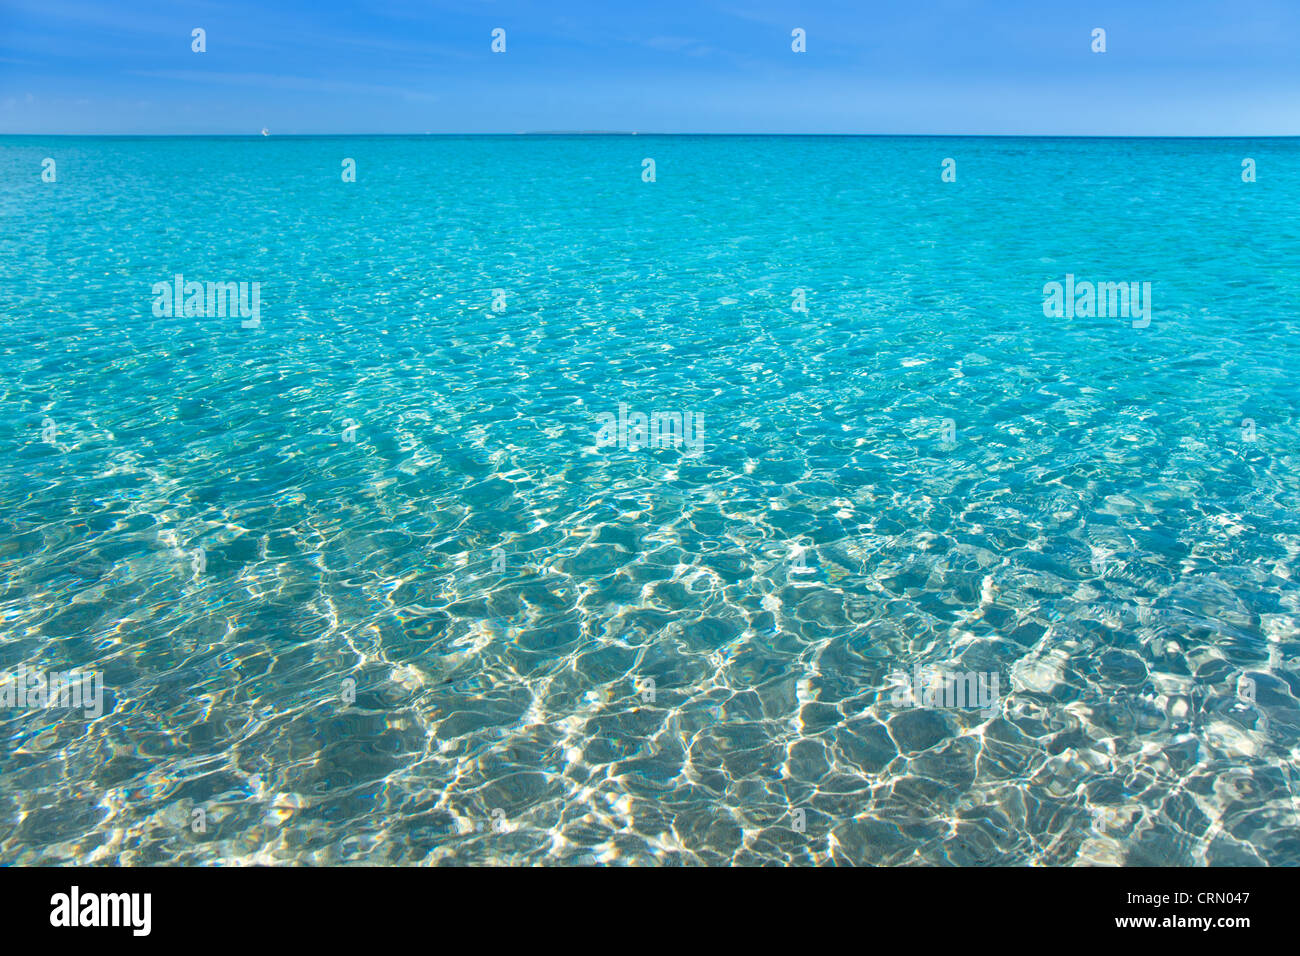 beach tropical with white sand and turquoise water under blue sky Stock Photo